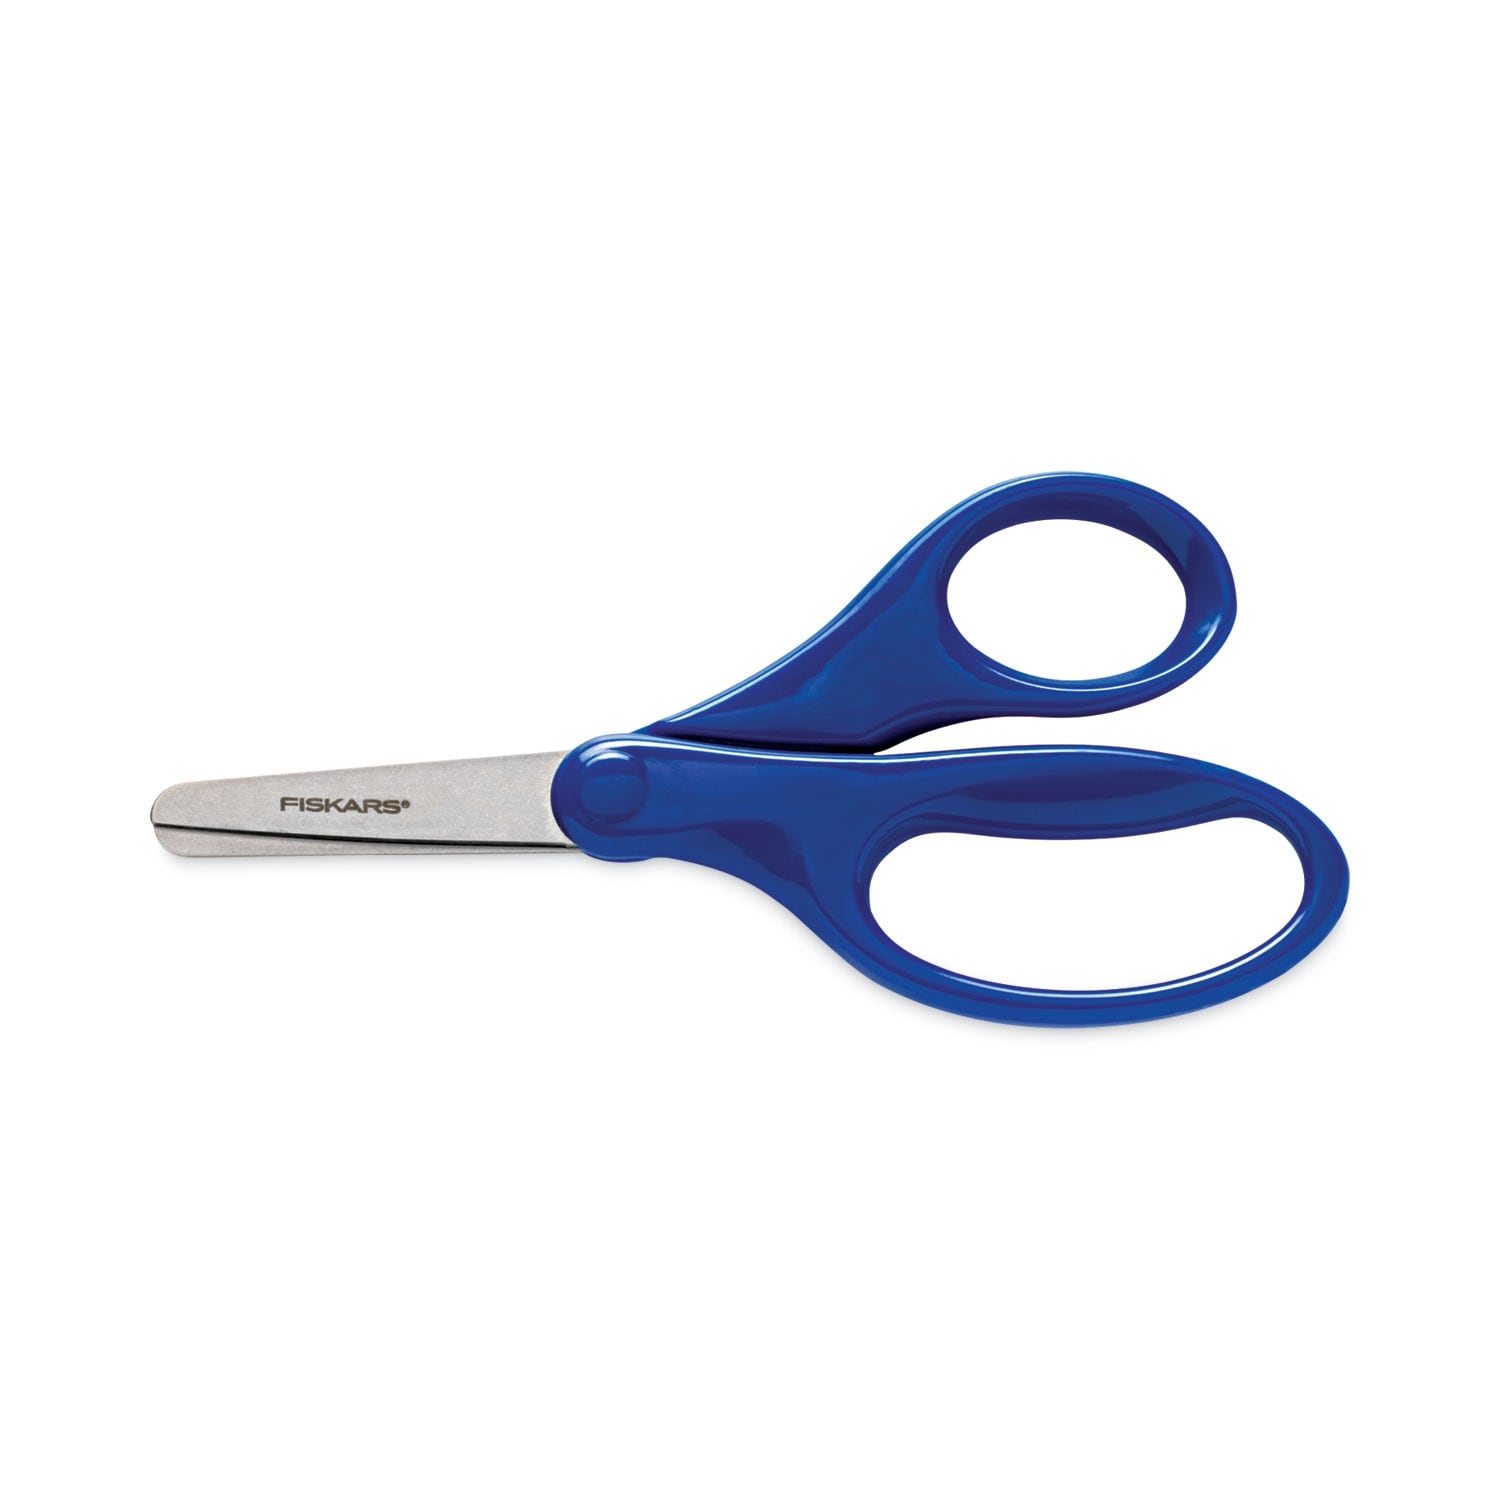 Kids/Student Scissors, Rounded Tip, Assorted Strai...